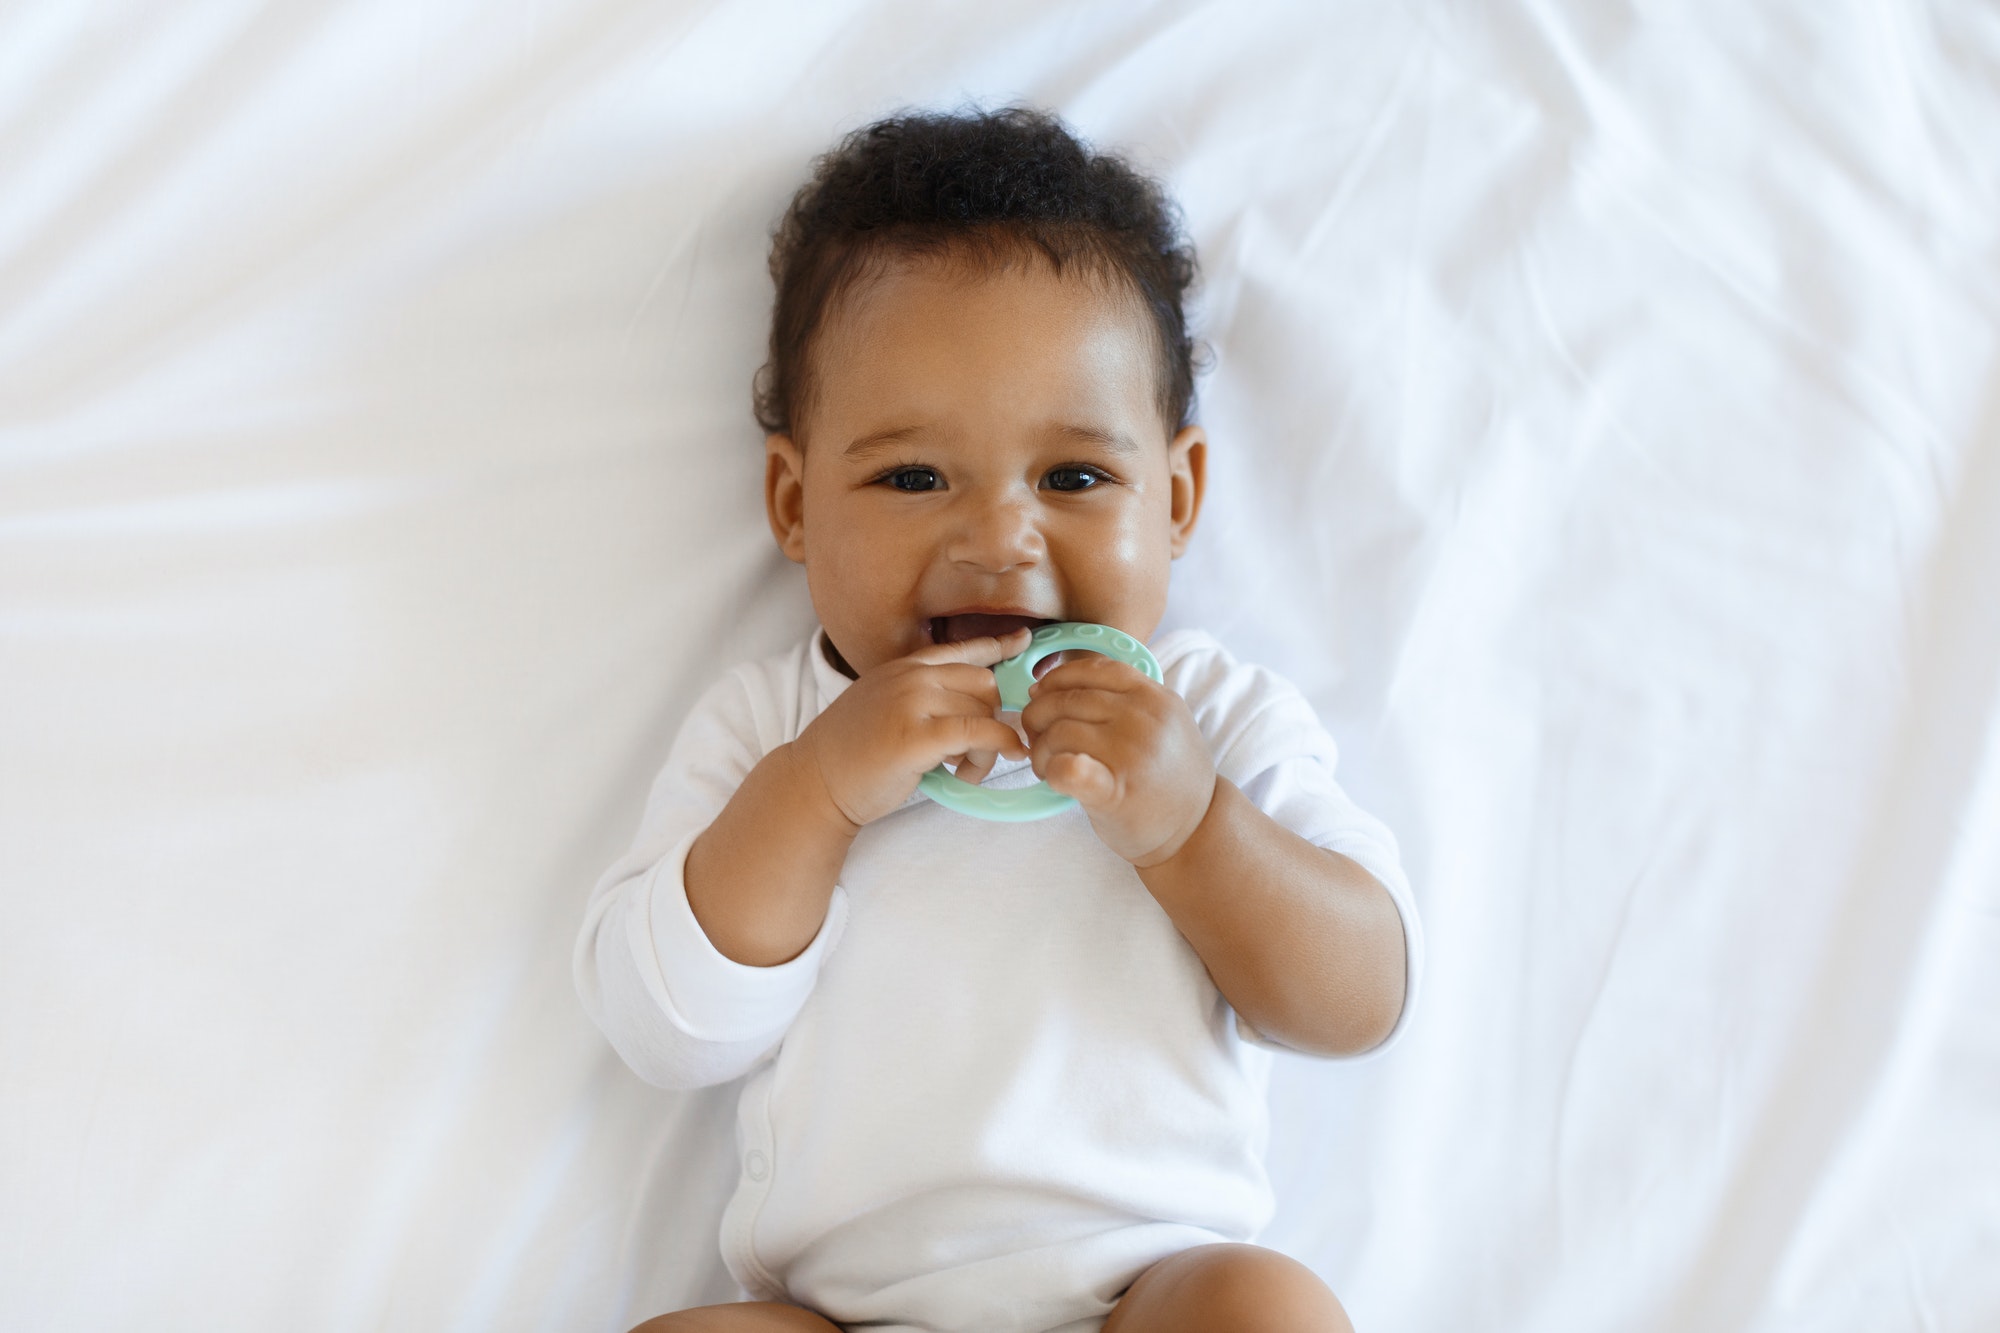 Portrait Of Adorable African American Baby Biting Teether And Looking At Camera